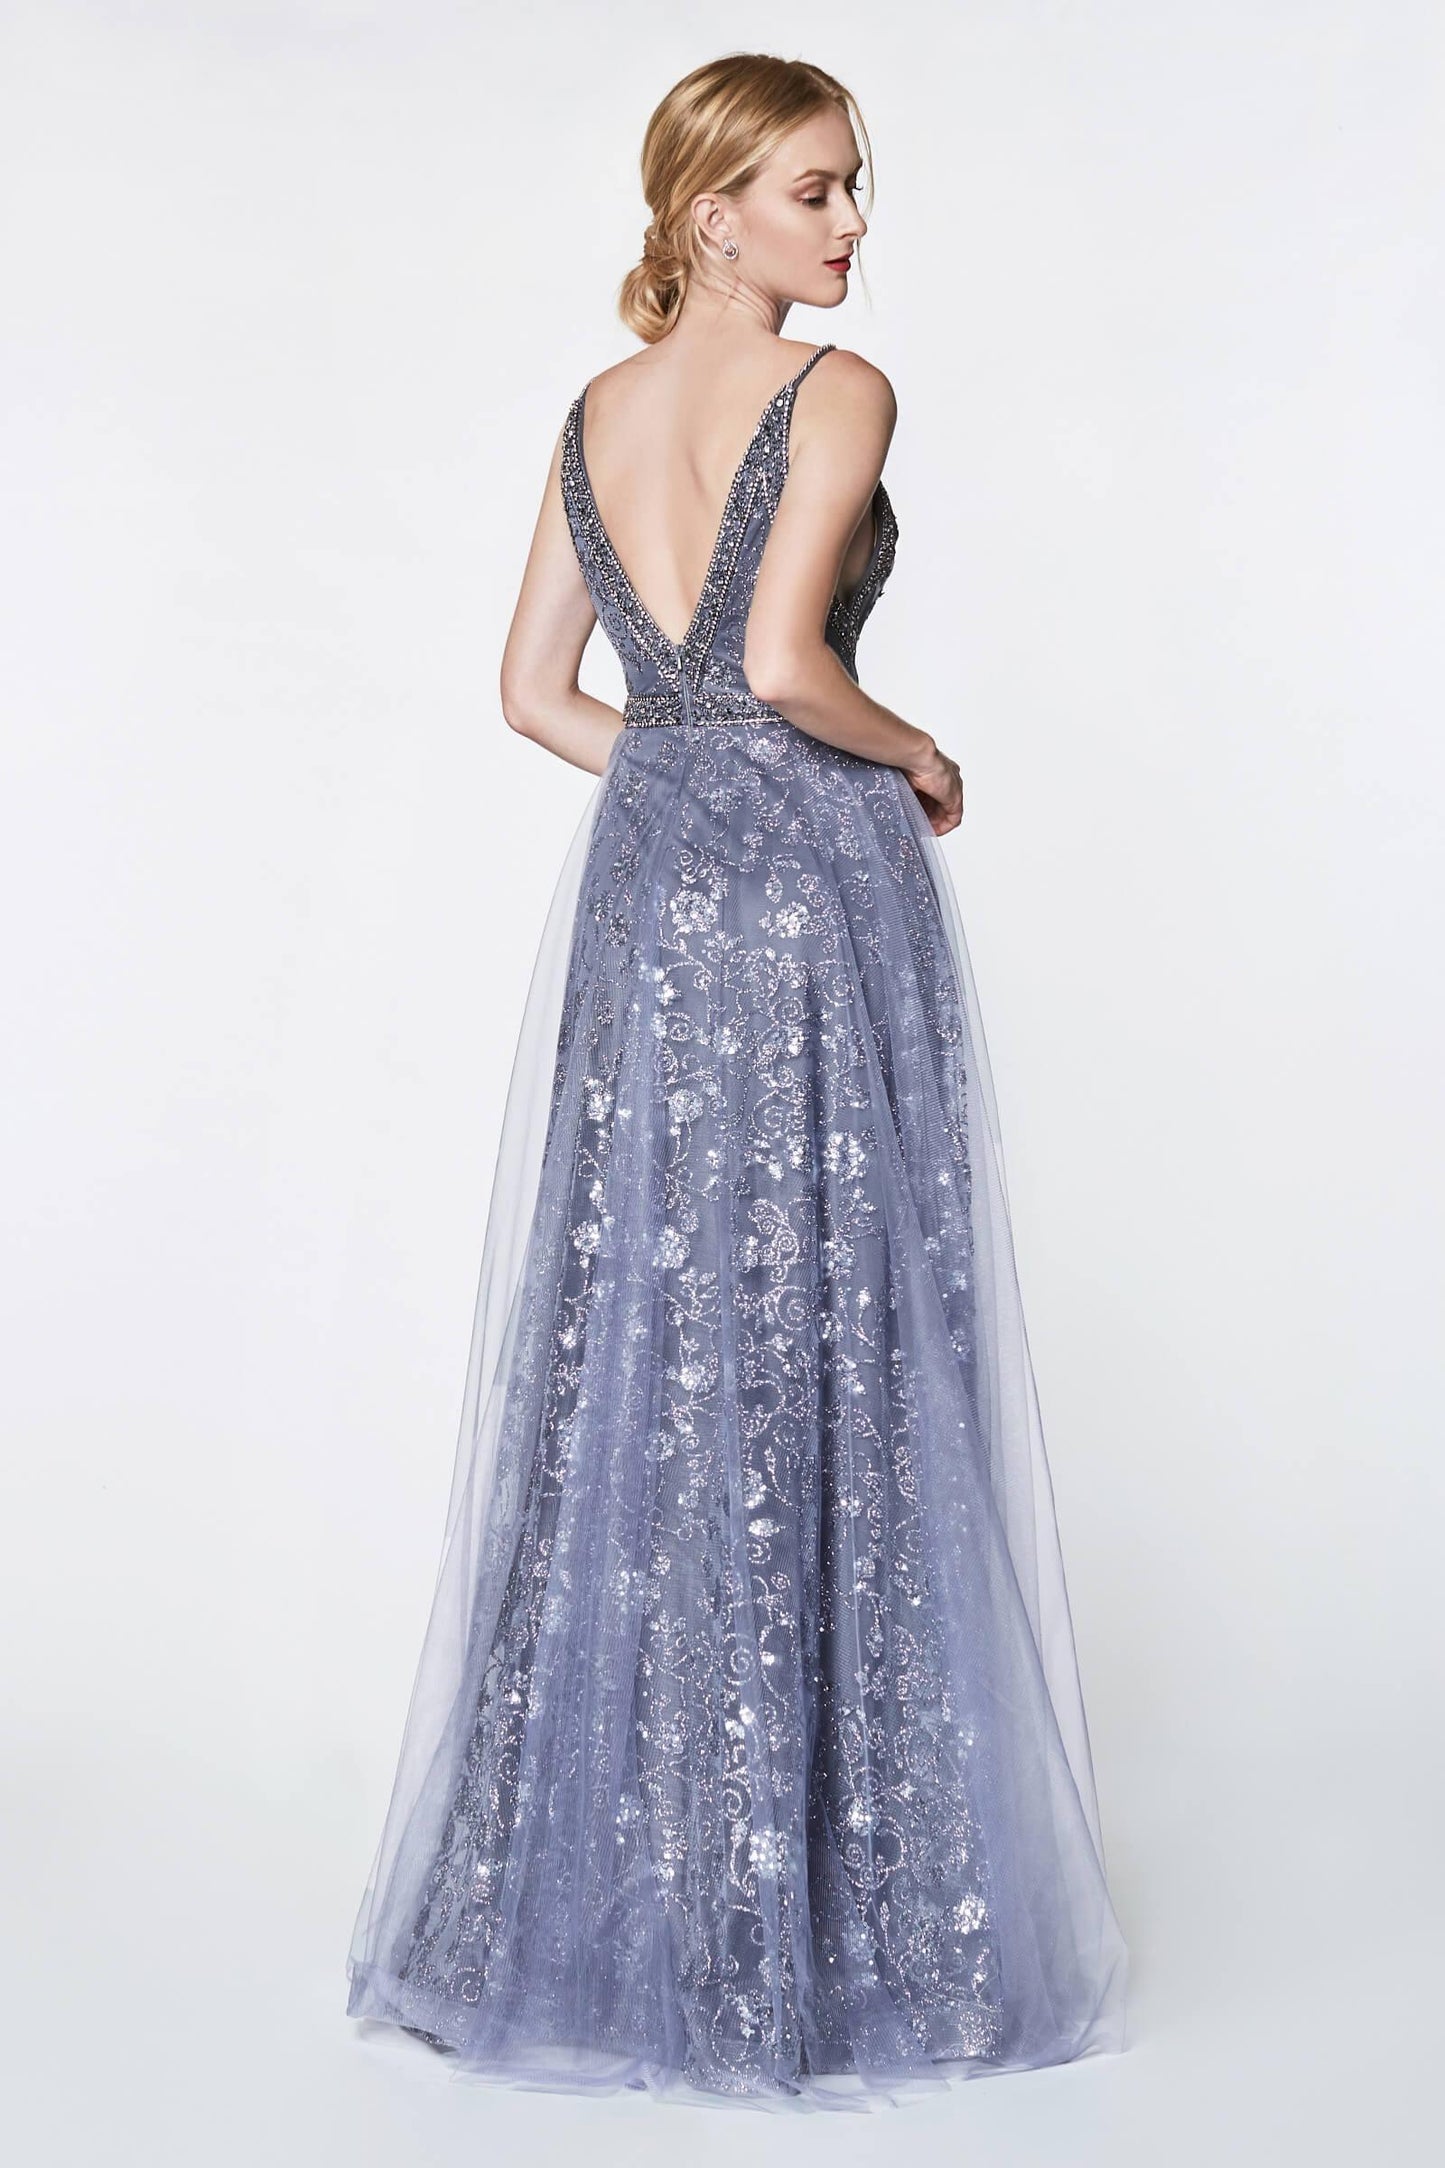 Long A Line Glitter Gown Prom Dress - The Dress Outlet